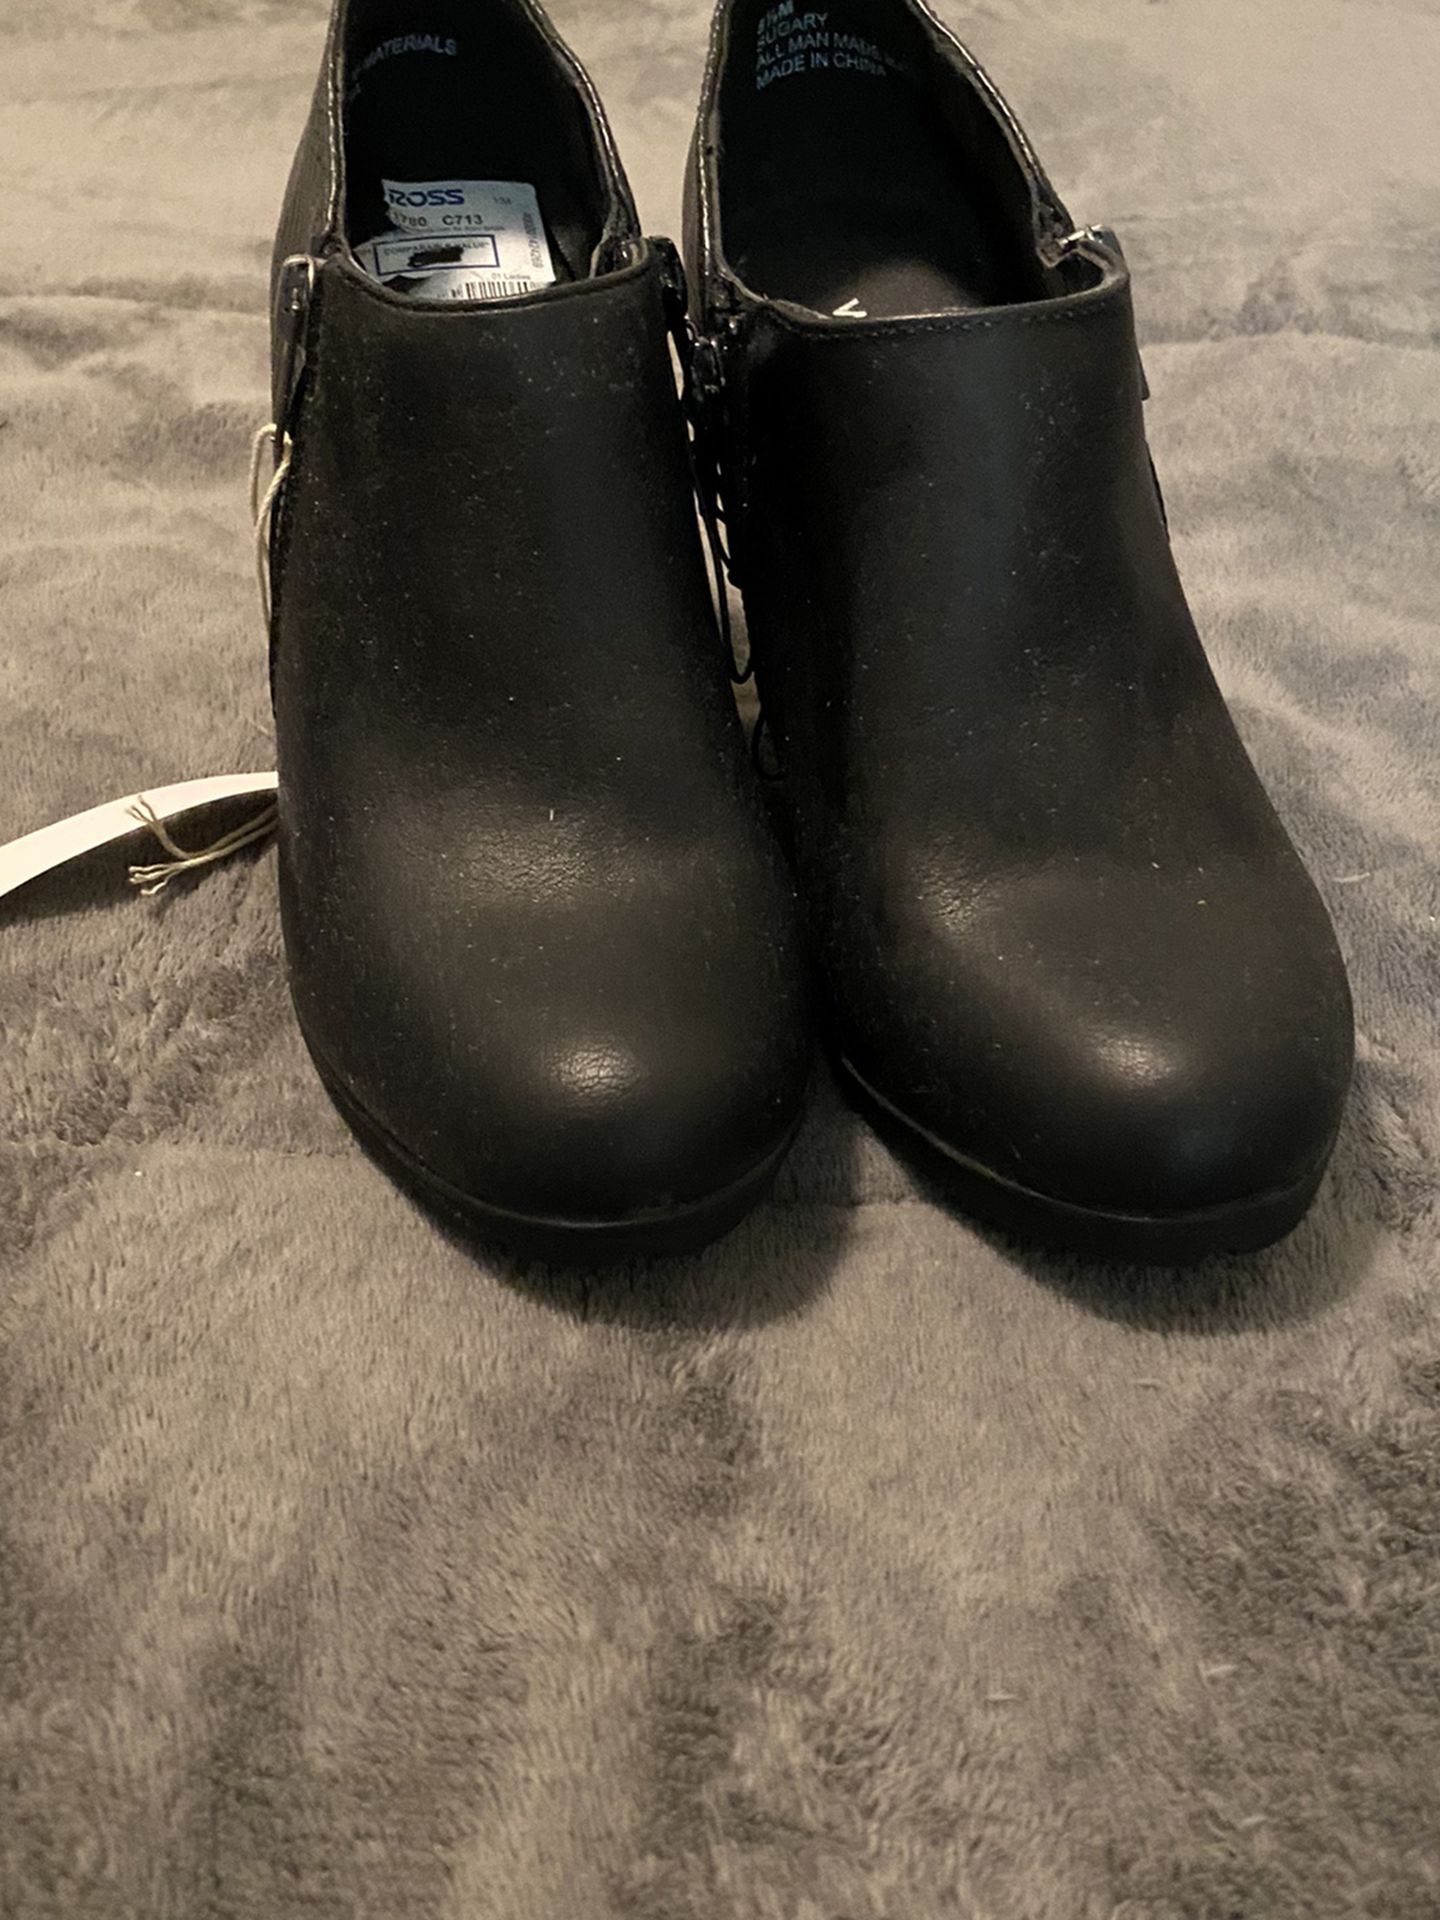 Fuax Leather Black Ankle Booties